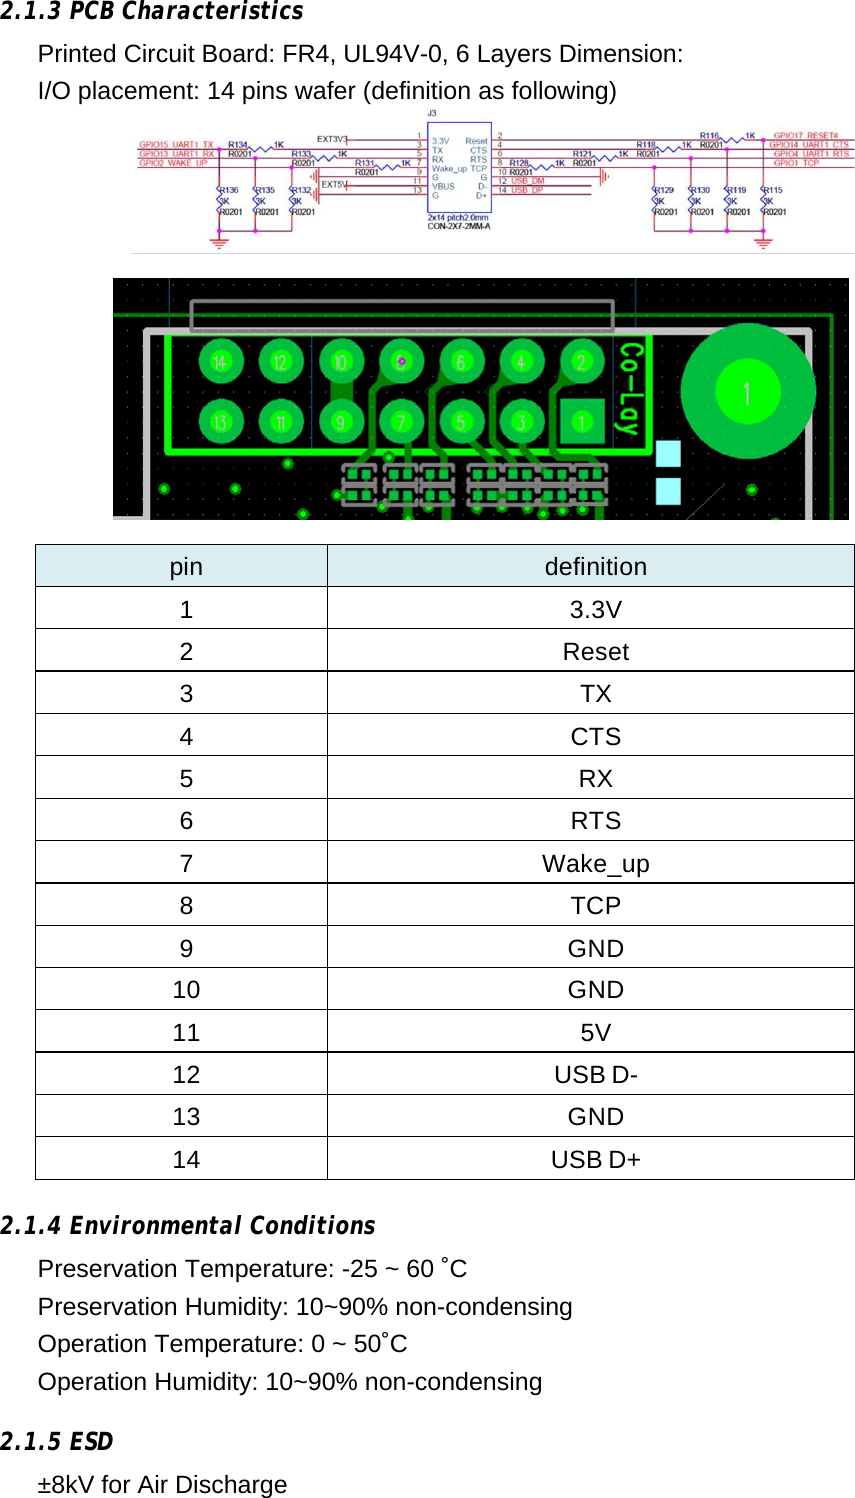        2.1.3 PCB Characteristics Printed Circuit Board: FR4, UL94V-0, 6 Layers Dimension:  I/O placement: 14 pins wafer (definition as following)   pin  definition 1 3.3V 2 Reset 3 TX 4 CTS 5 RX 6 RTS 7 Wake_up 8 TCP 9 GND 10 GND 11 5V 12 USB D- 13 GND 14 USB D+    2.1.4 Environmental Conditions Preservation Temperature: -25 ~ 60 ˚C  Preservation Humidity: 10~90% non-condensing  Operation Temperature: 0 ~ 50˚C Operation Humidity: 10~90% non-condensing    2.1.5 ESD ±8kV for Air Discharge 